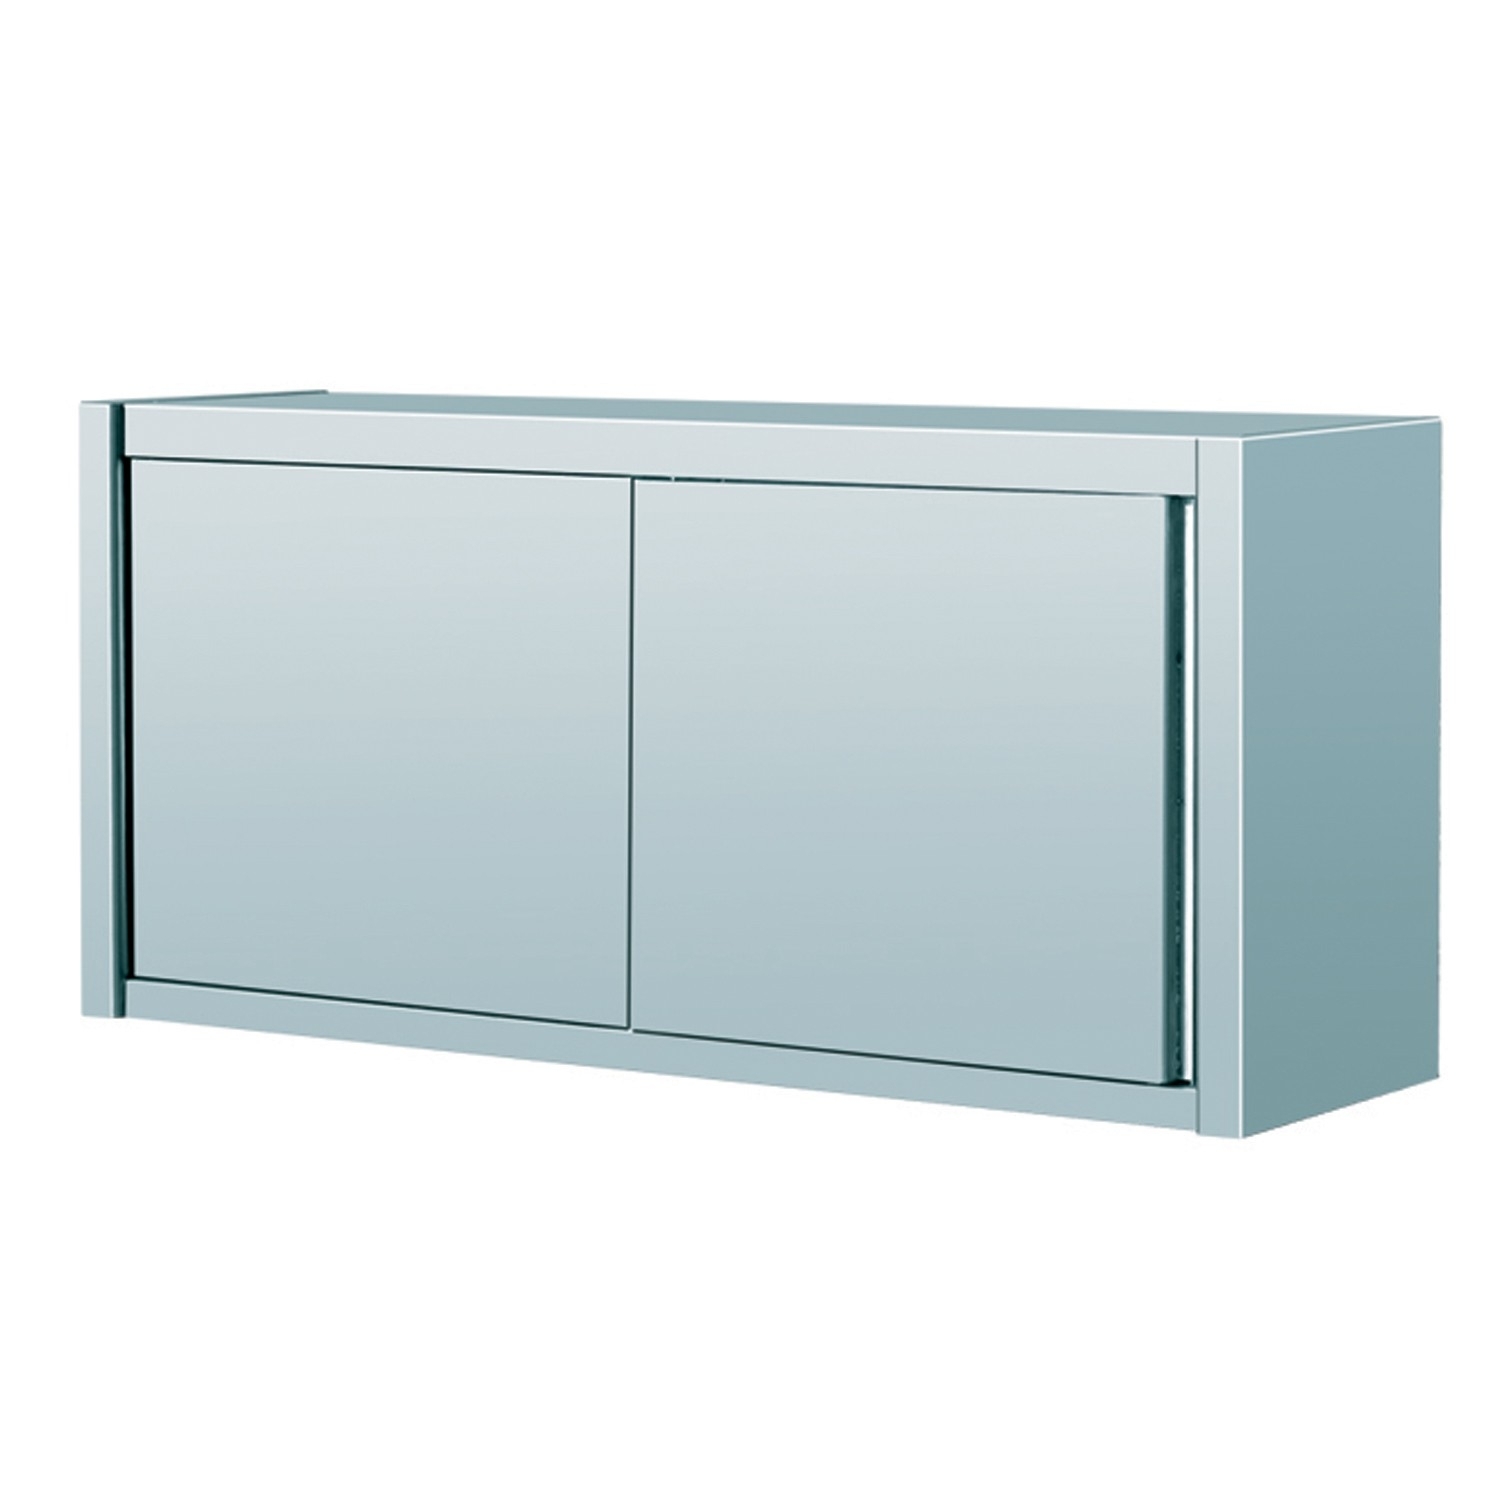 Wall Cabinet With Sliding Doorswall cabinet with sliding doors furniture sliding doors ideas